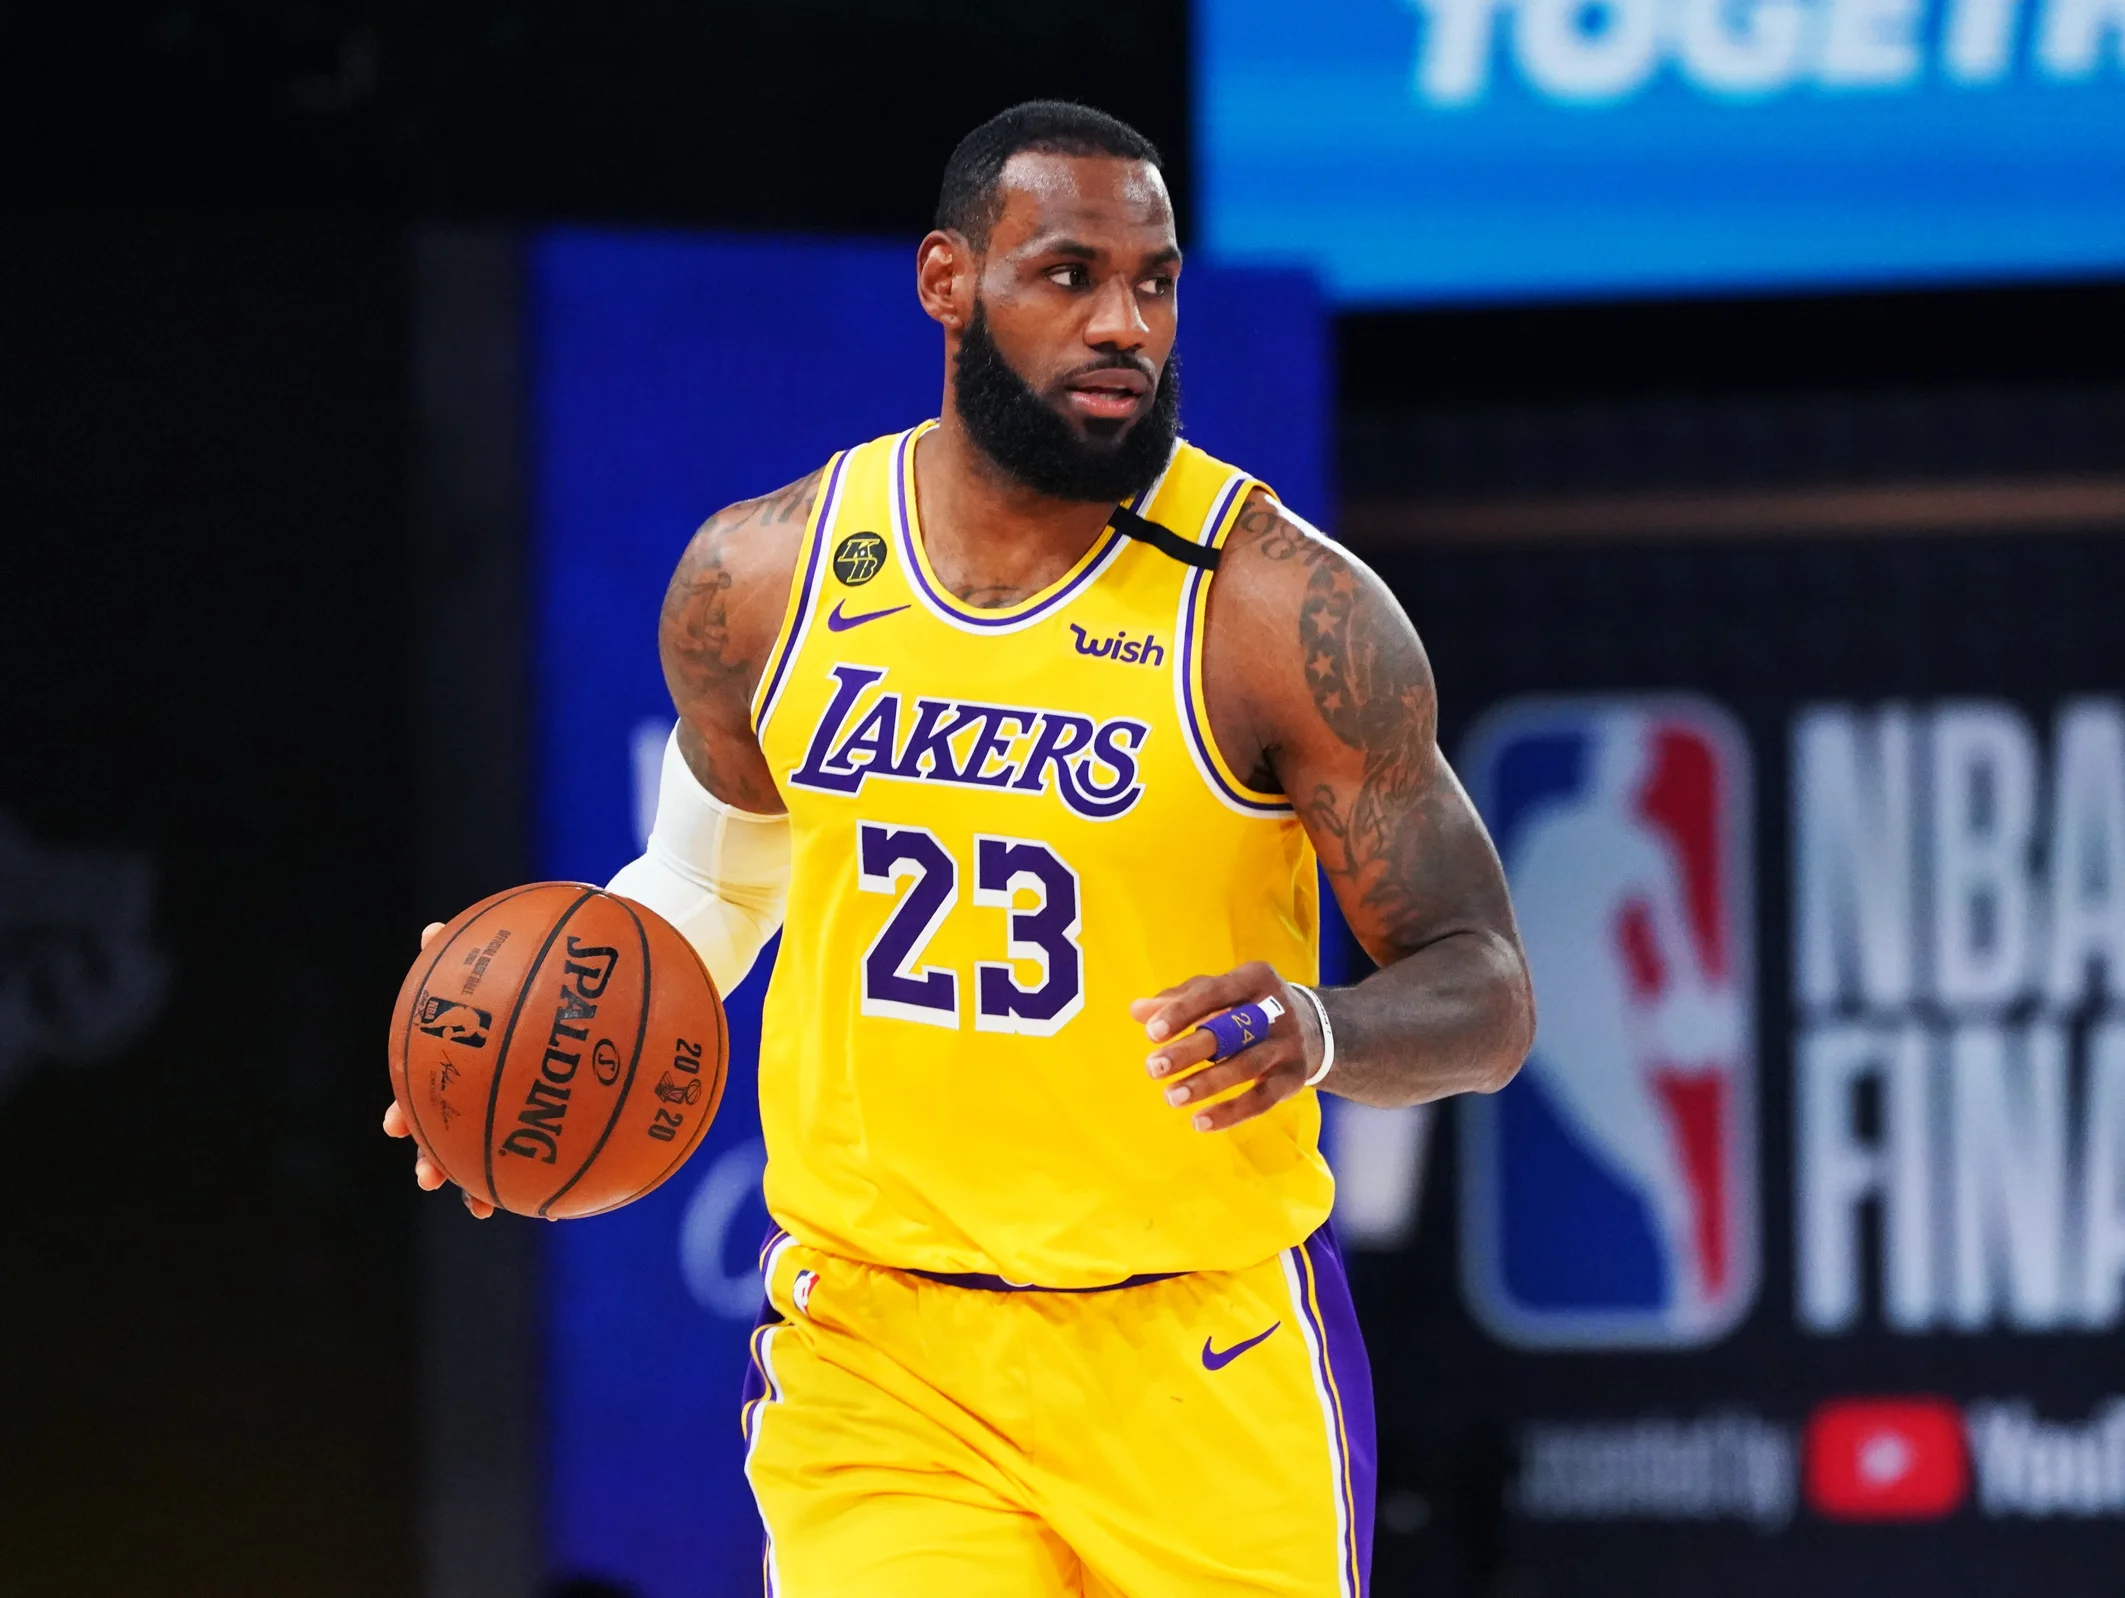 LeBron James in past match for LA Lakers